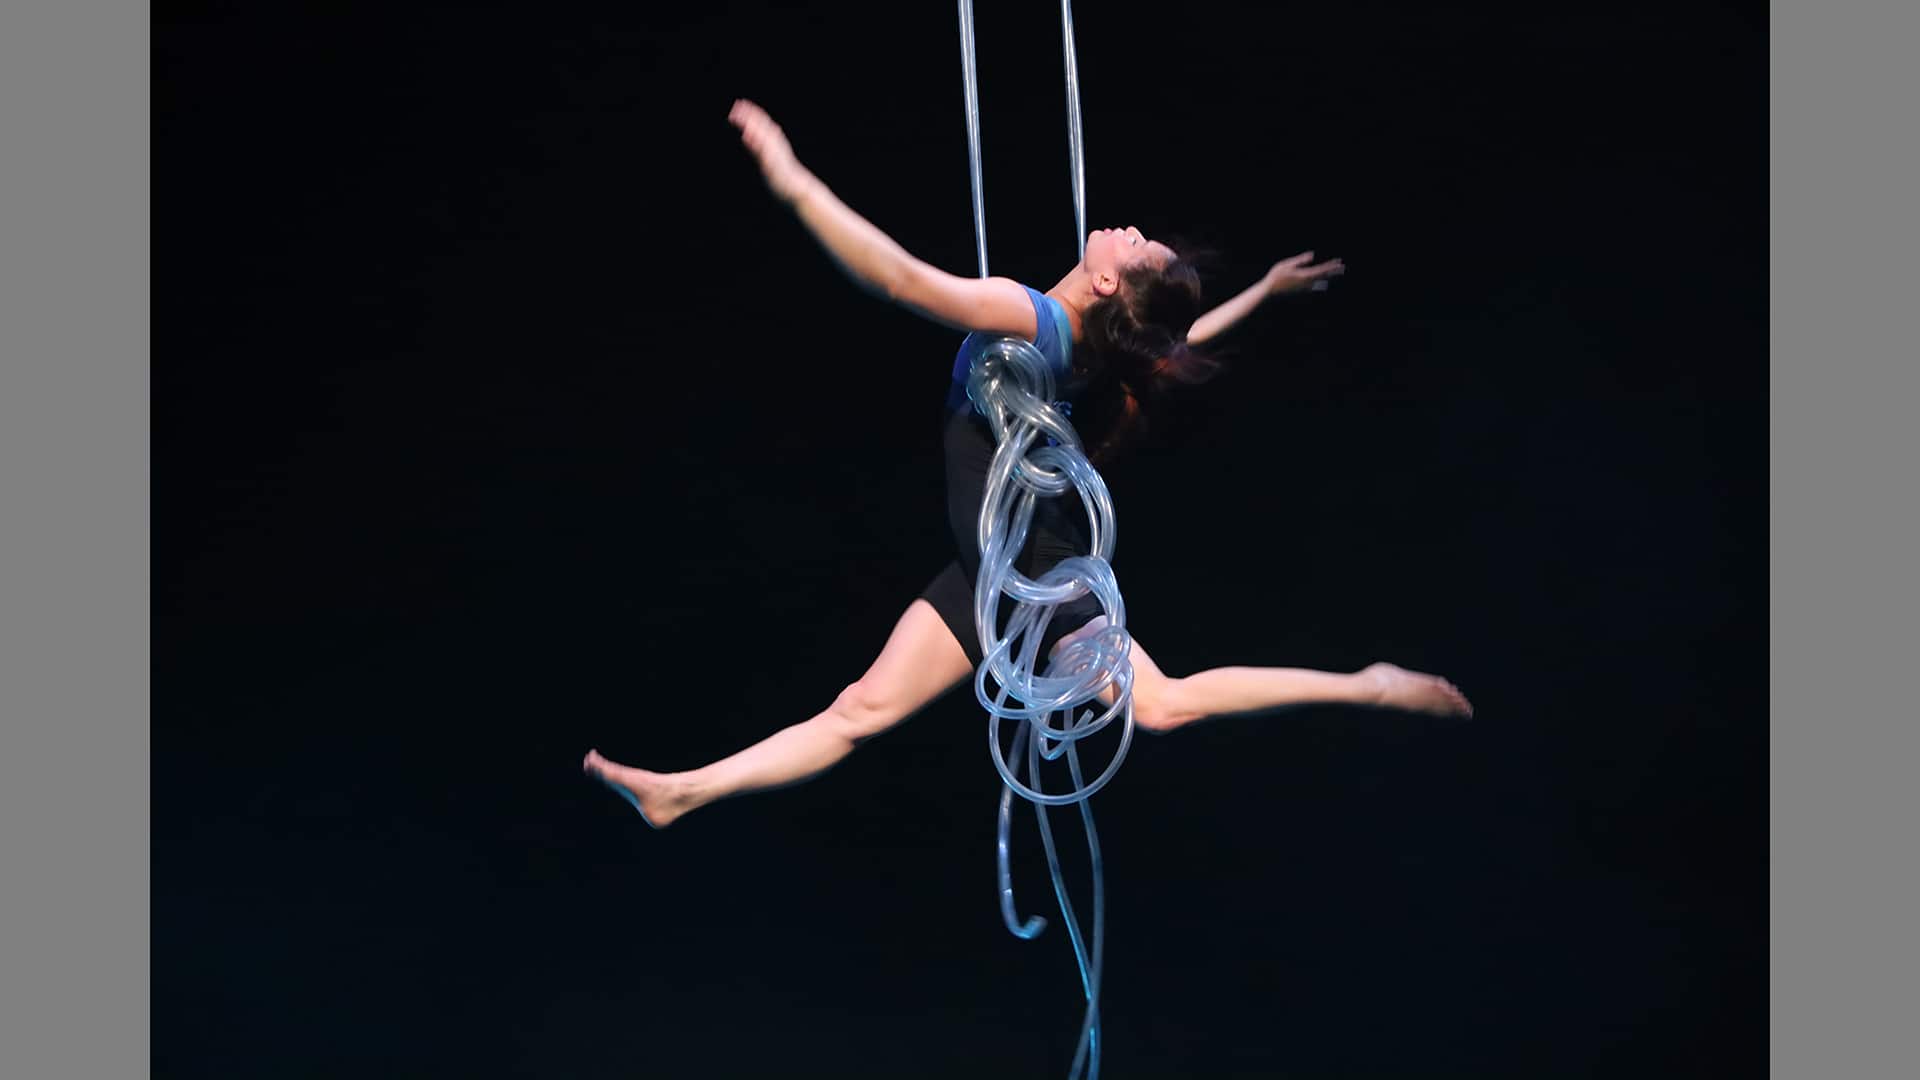 The performer swings above the stage using plastic tubing as a rope. Her legs are outstretched in a split. her arms also flung out. The plastic tubing is knotted around her body